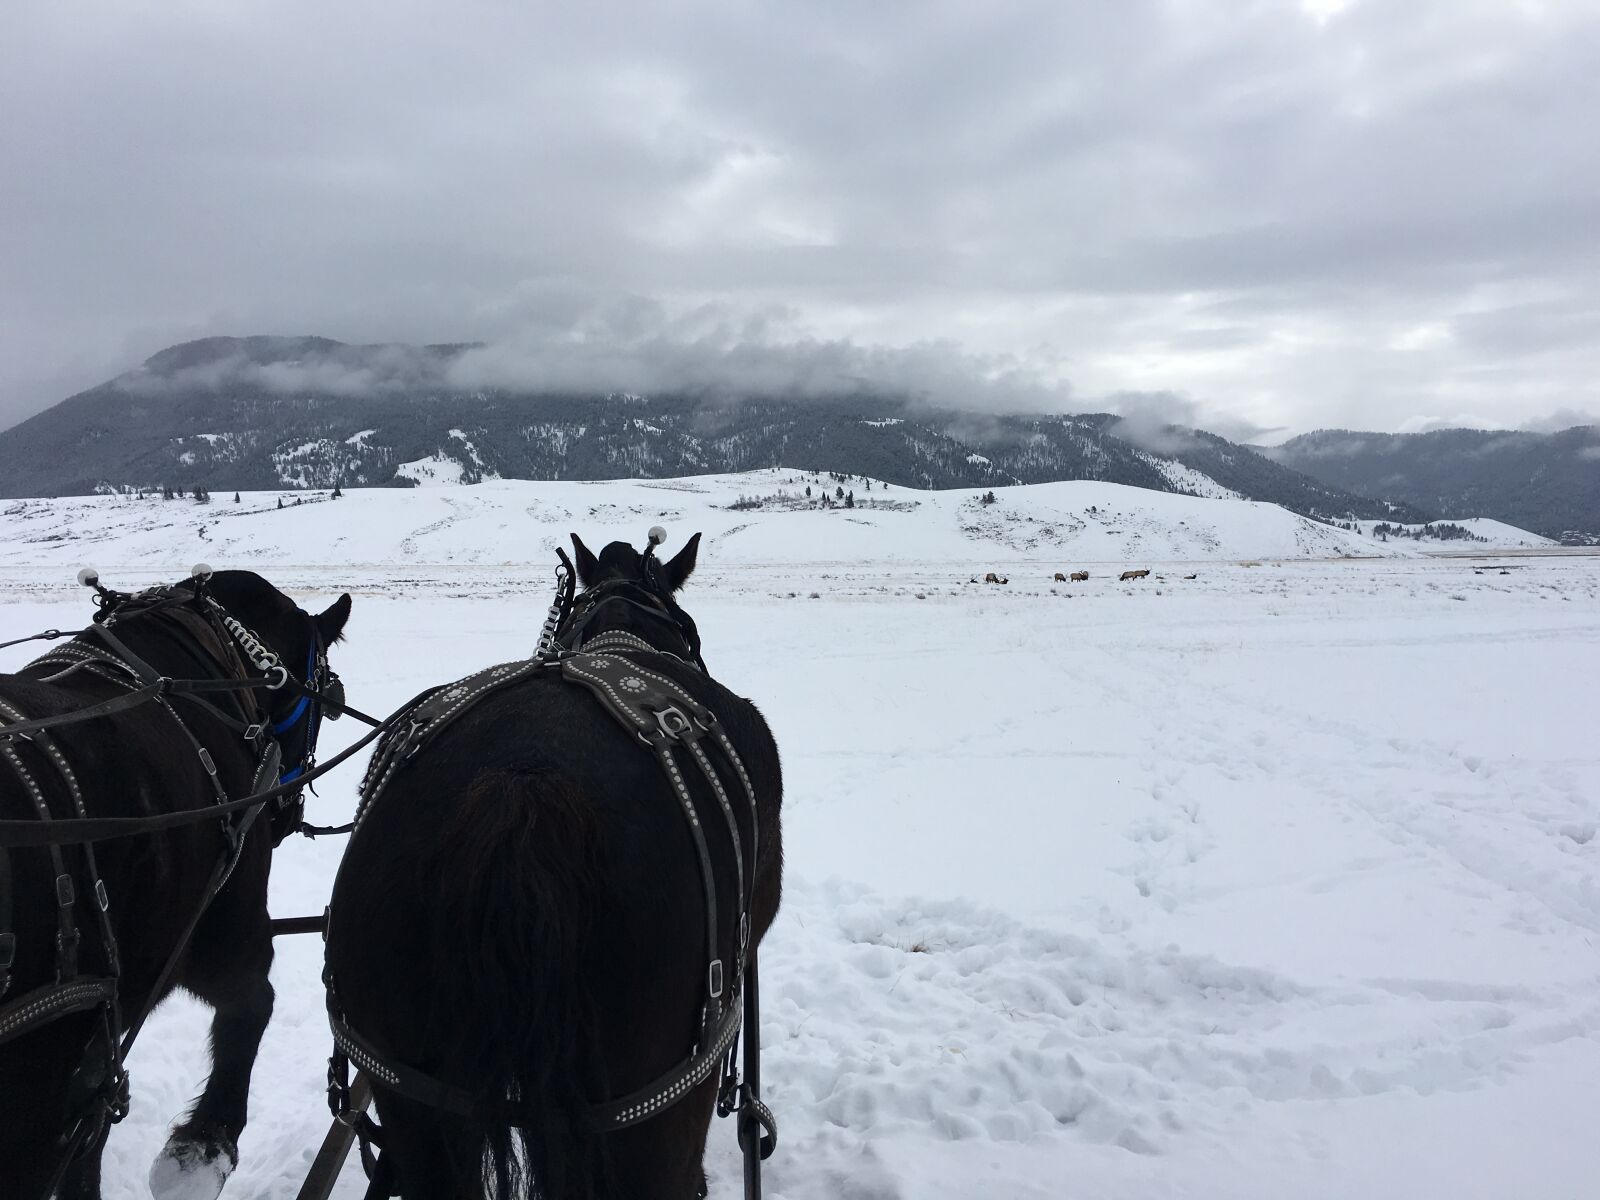 Apple iPhone 6s sample photo. Snow, horses, mountains photography